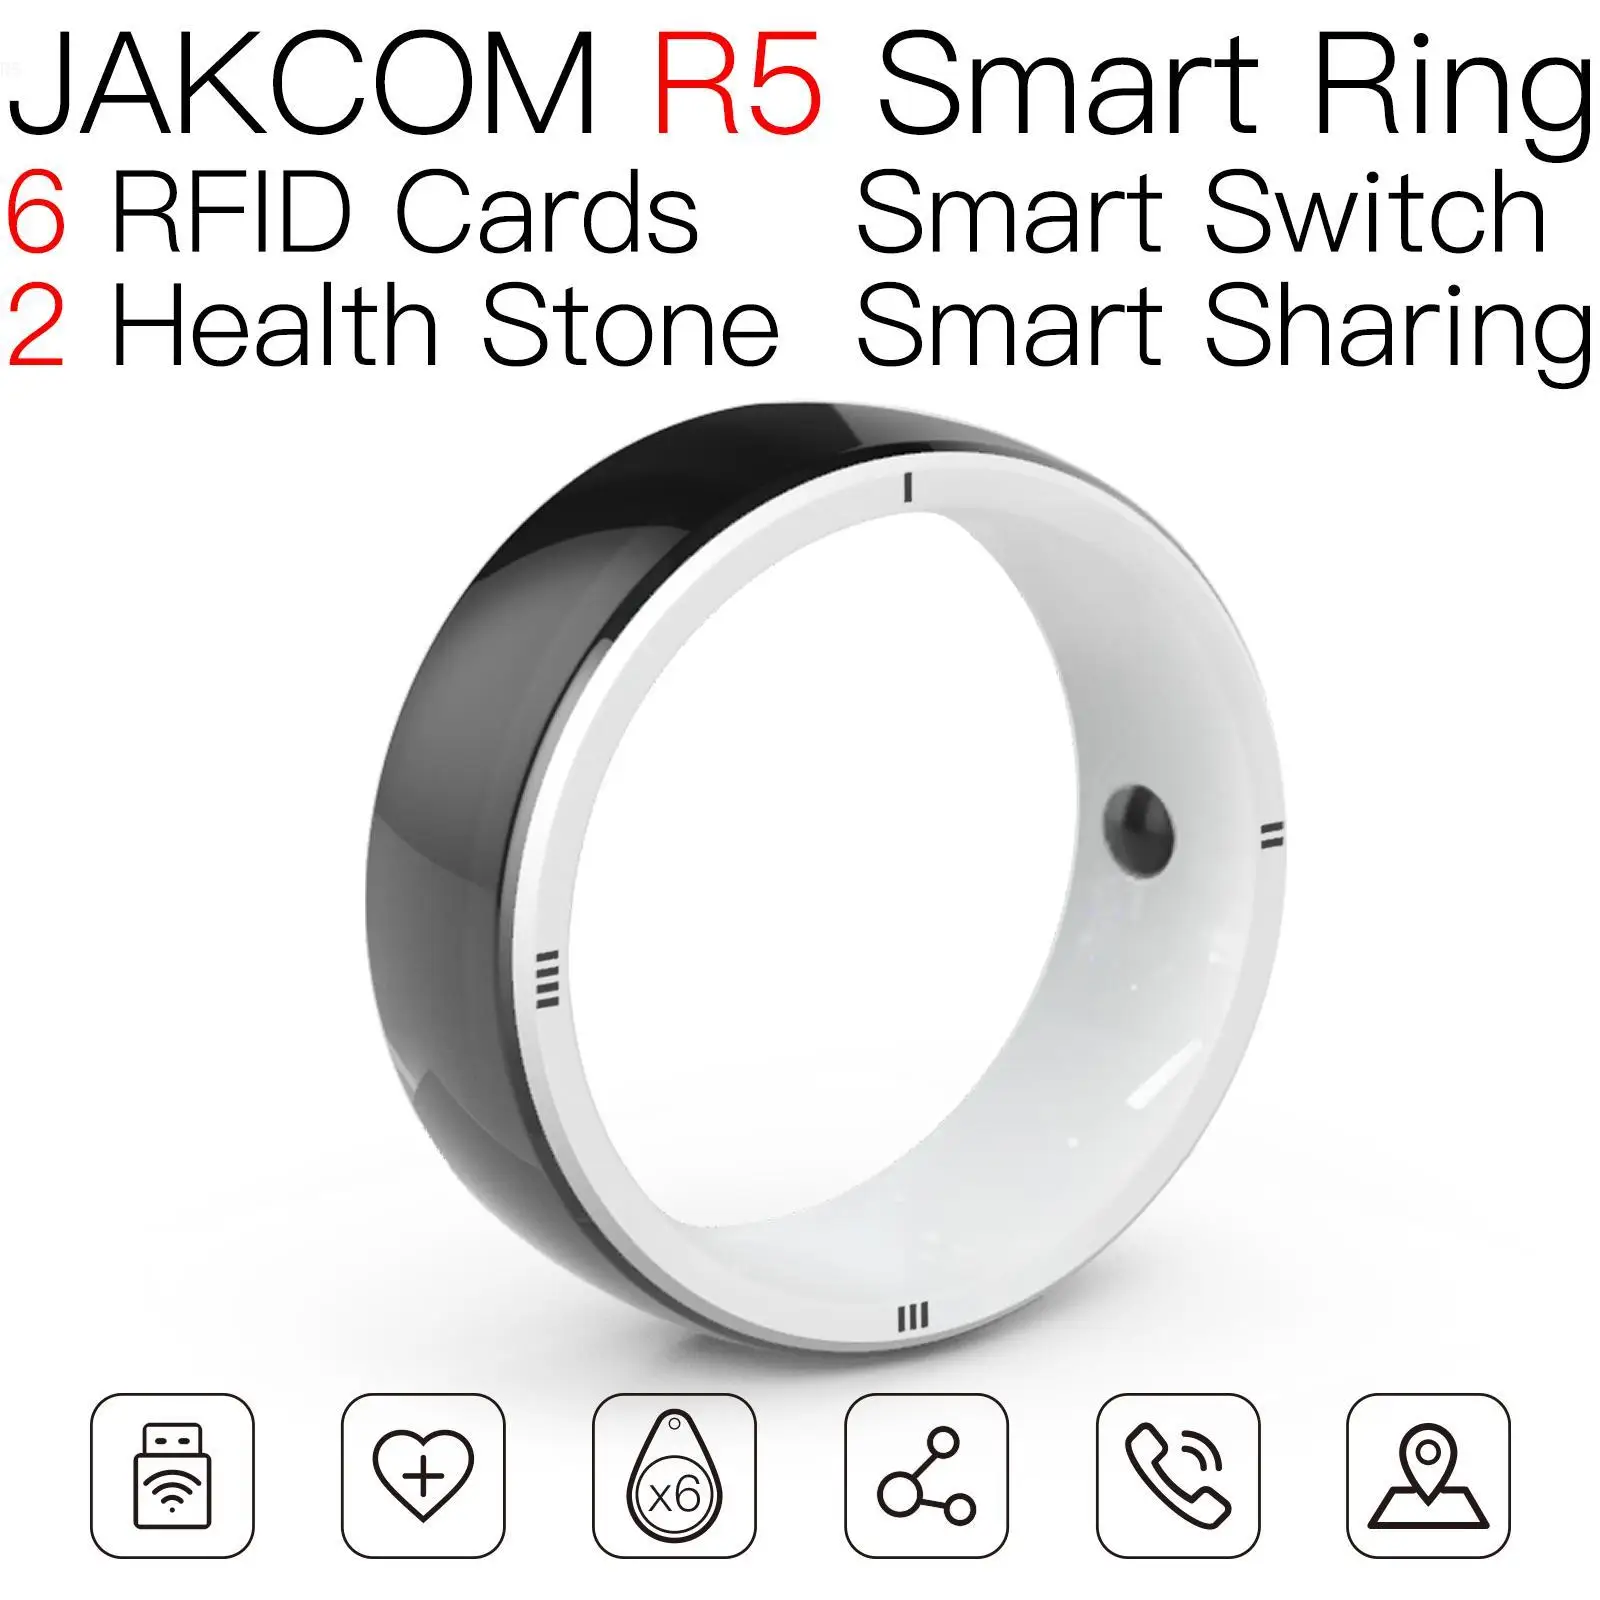 

JAKCOM R5 Smart Ring Super value as new user deal with free shipping quartz wristwatches band8 watch smart for